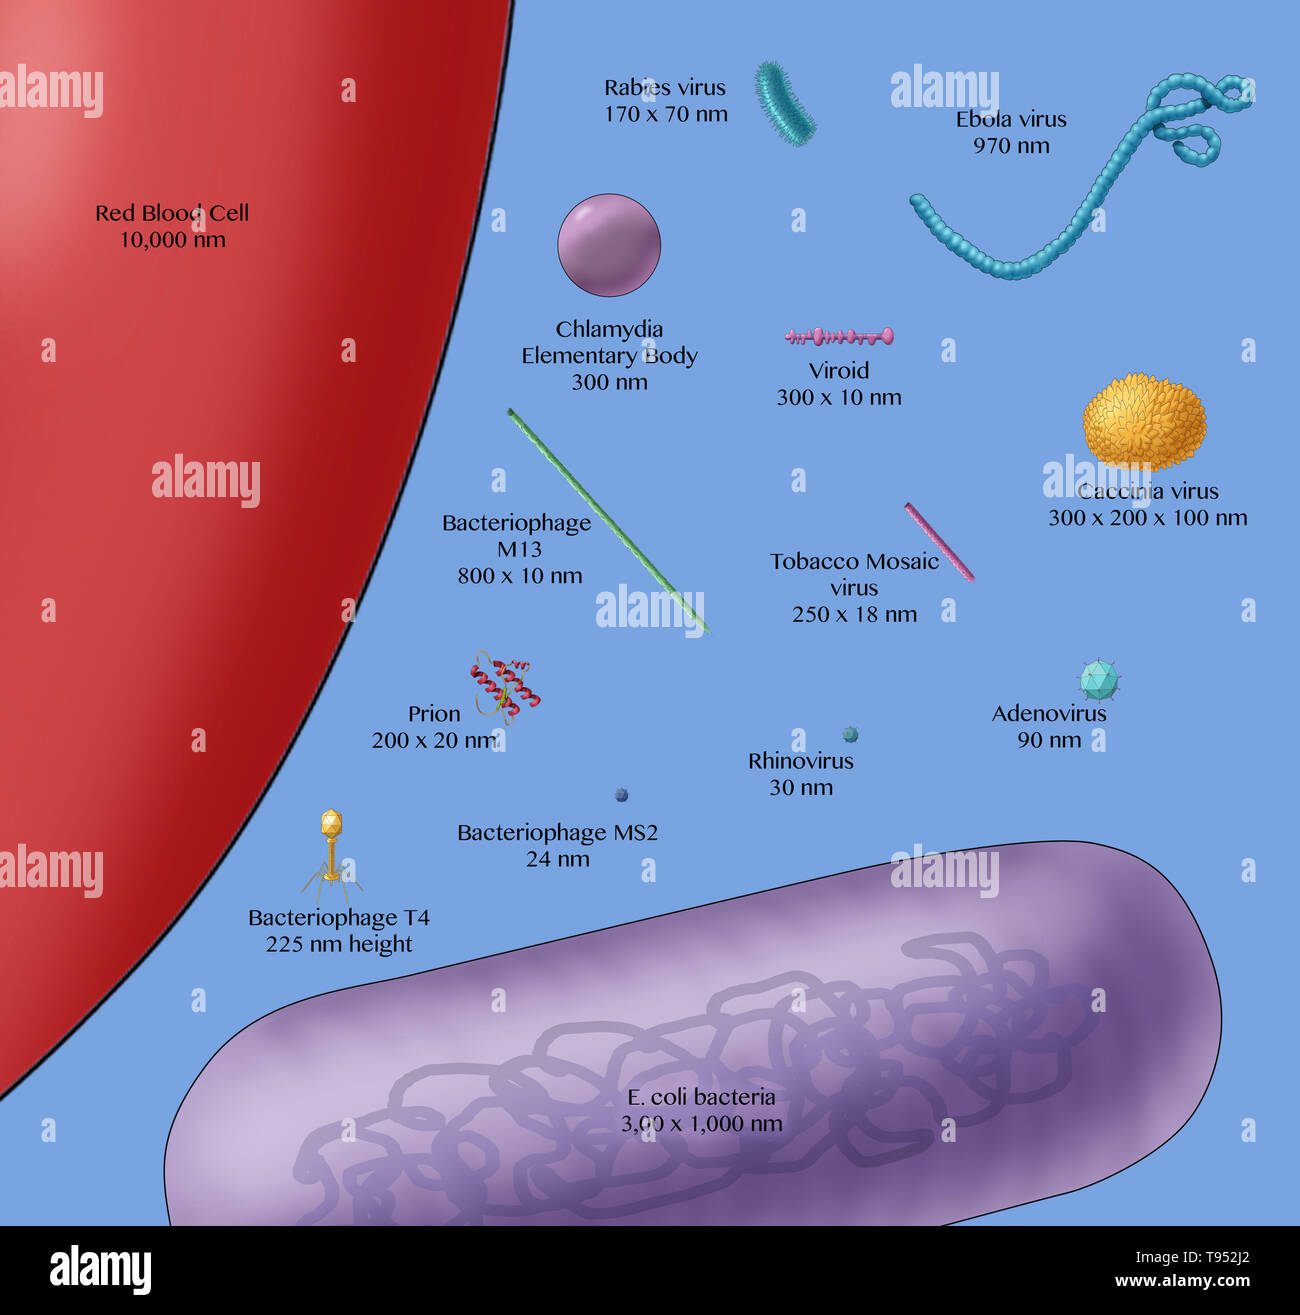 Illustration showing the relative sizes of a red blood cell (left), bacteria (purple, bottom) and various viruses. Stock Photo